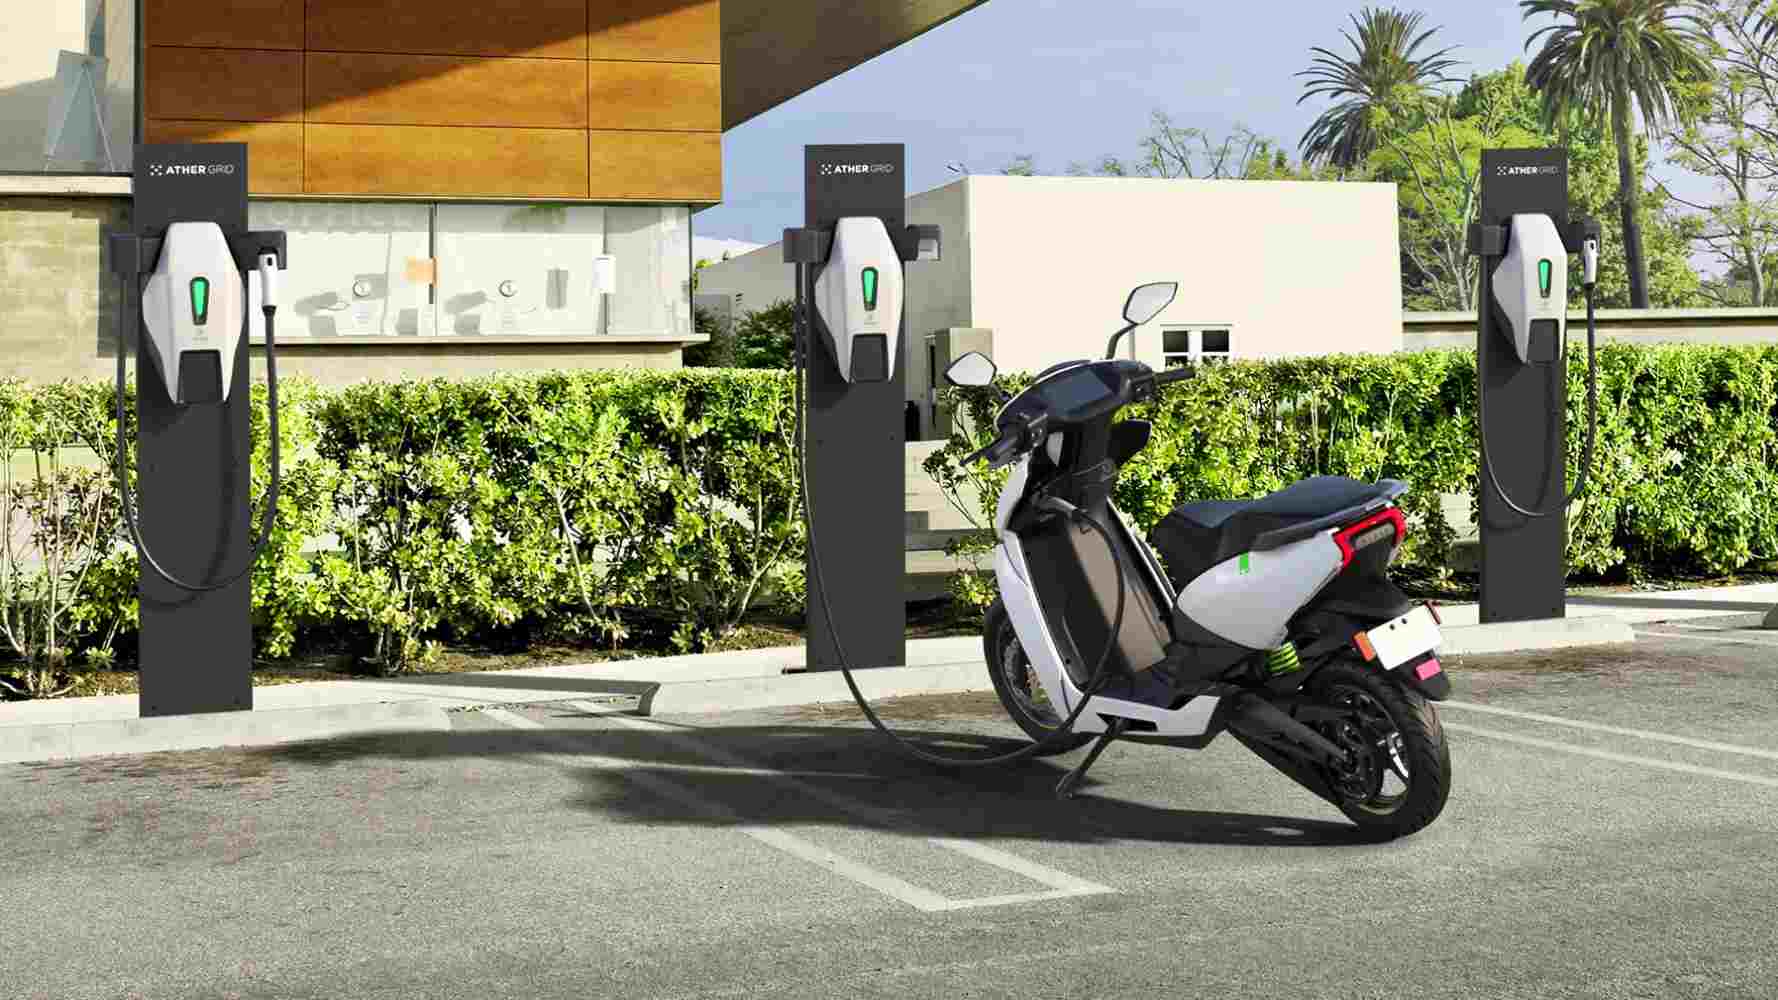 Two-wheelers with a battery capacity of up to 3 kWh will be eligible for a total incentive of Rs 25,000 in 2021, which drops to Rs 10,000 starting January 2022. Image: Ather Energy